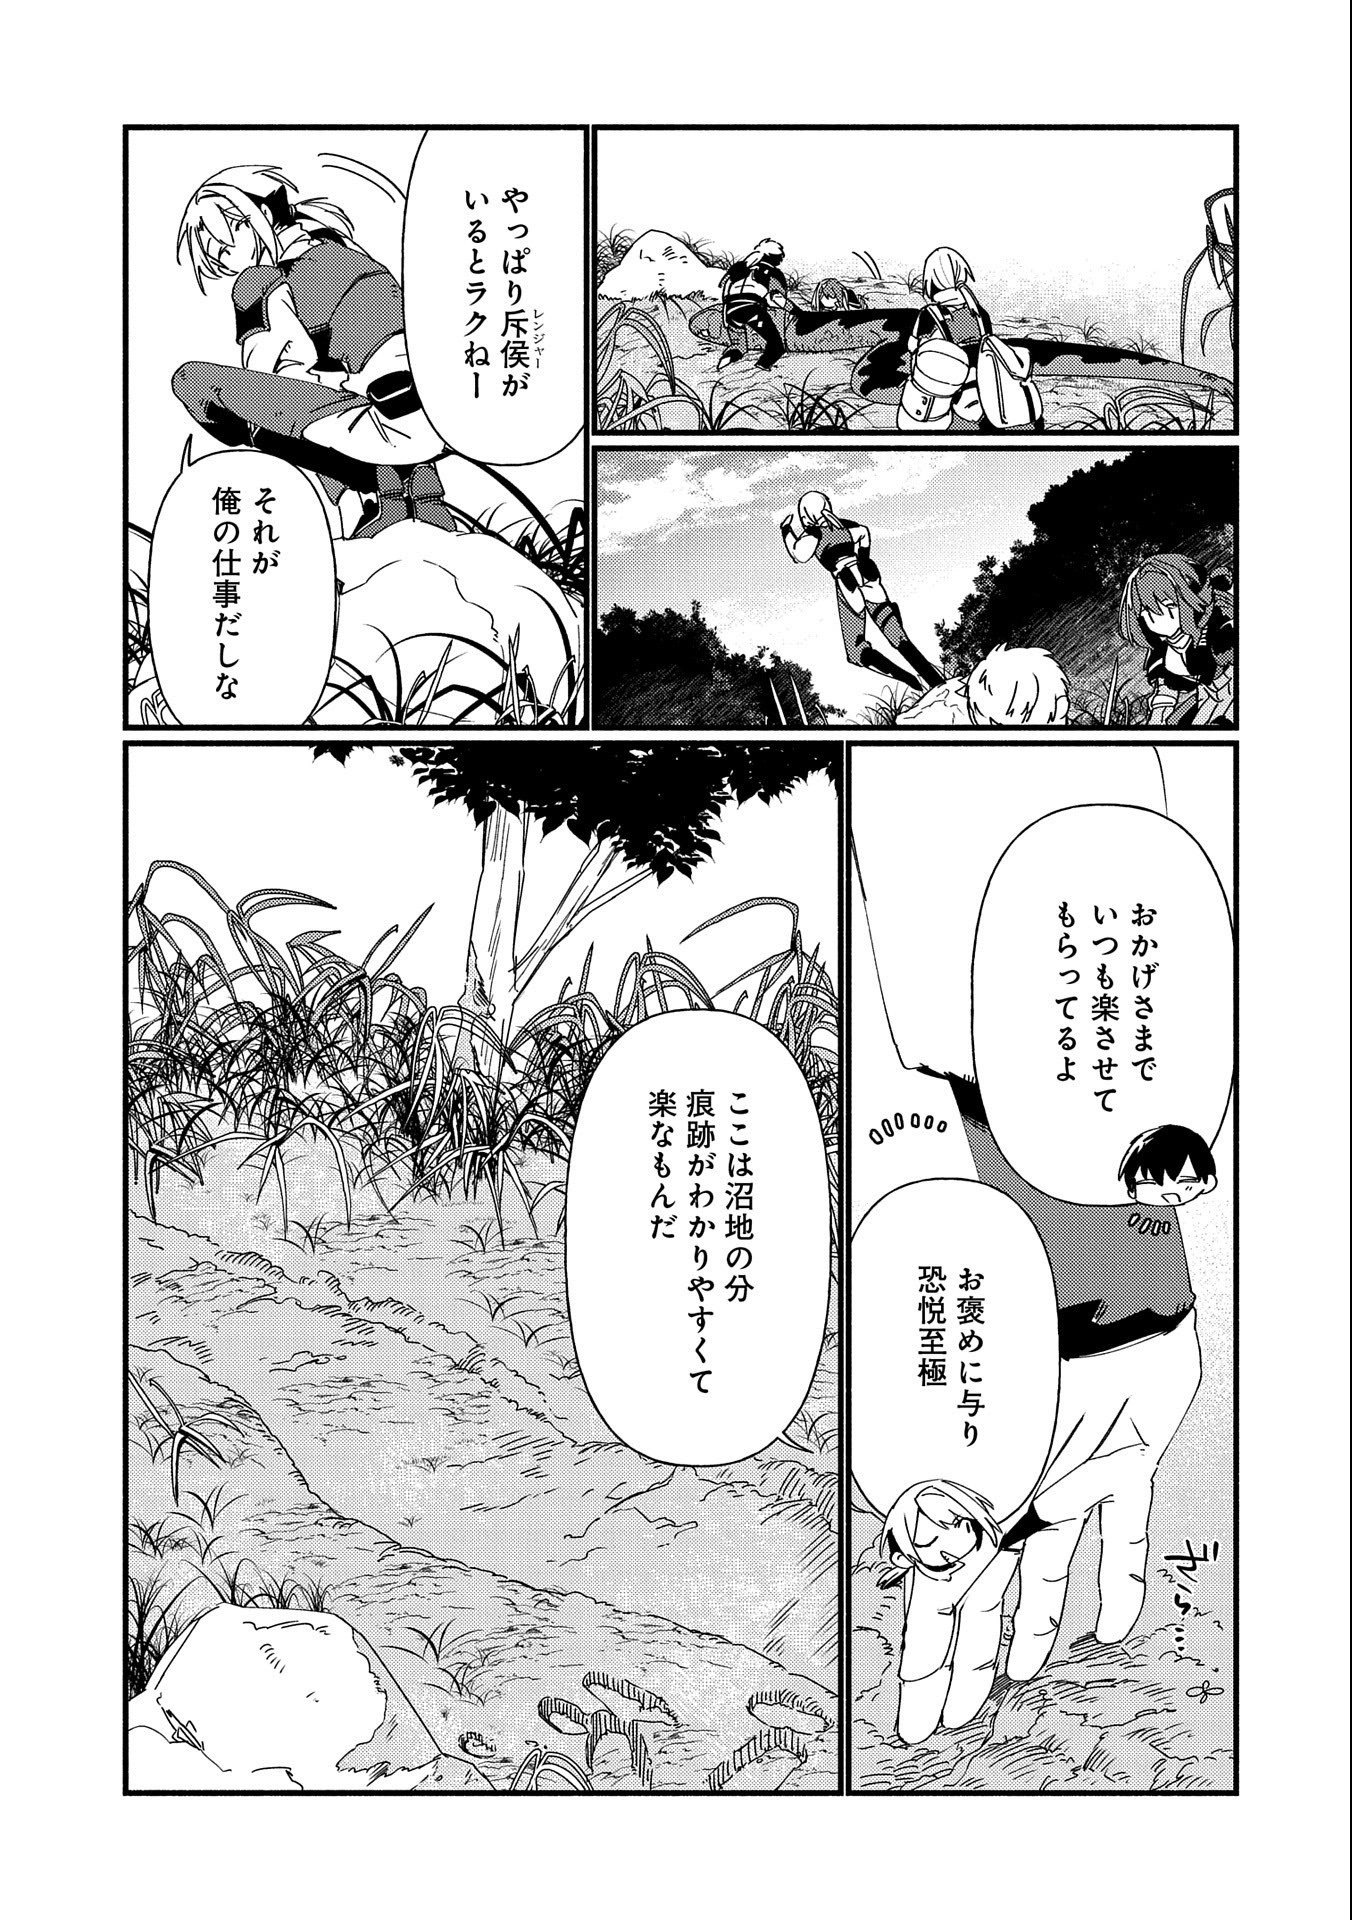 Nord’s Adventure 第7.2話 - Page 5